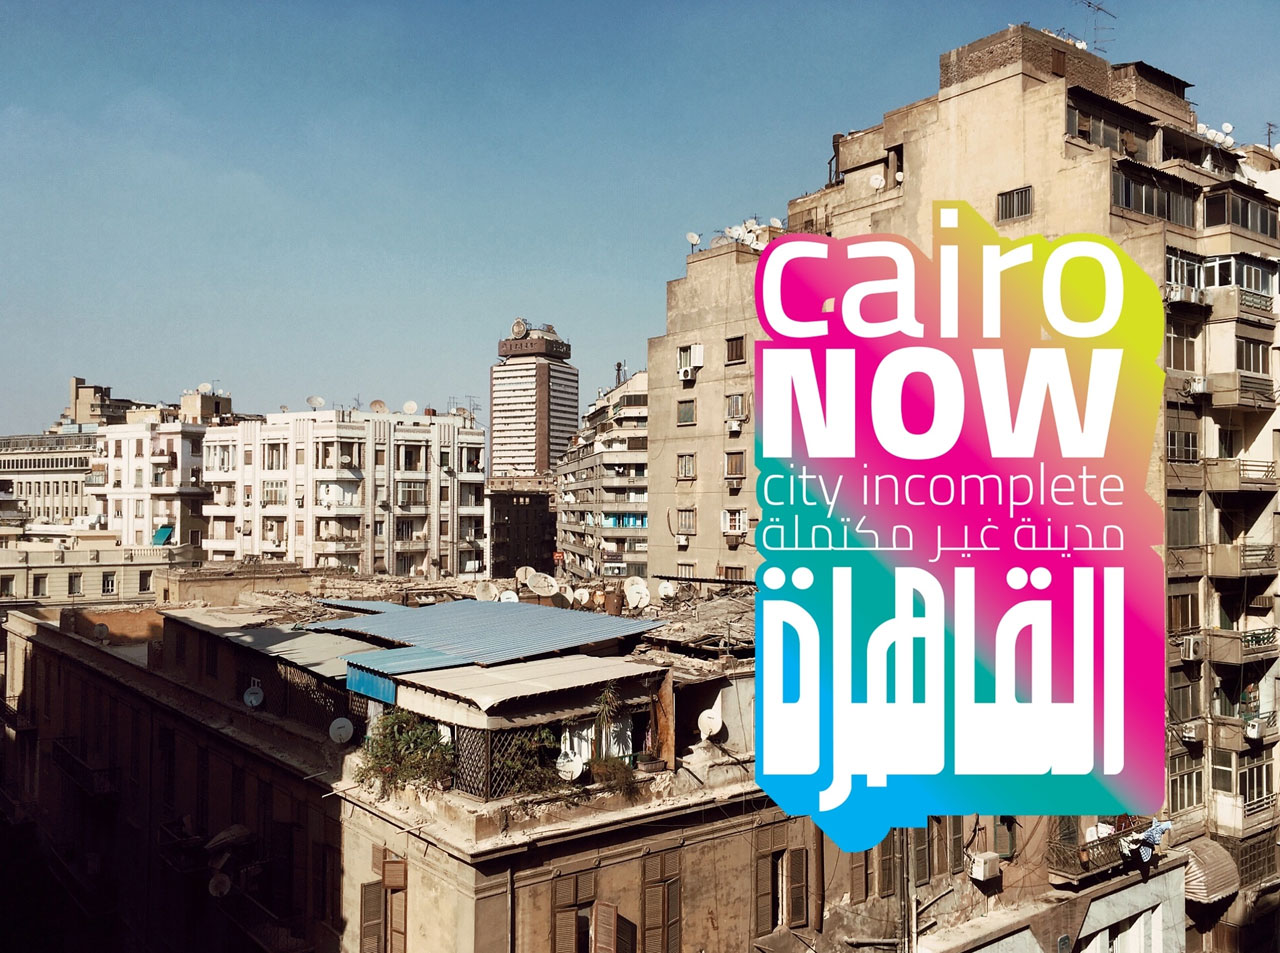 The poster of "Iconic City: Cairo Now! A City Incomplete", an exhibition curated by Cairo-based architect, independent researcher and writer Mohamed Elshahed.